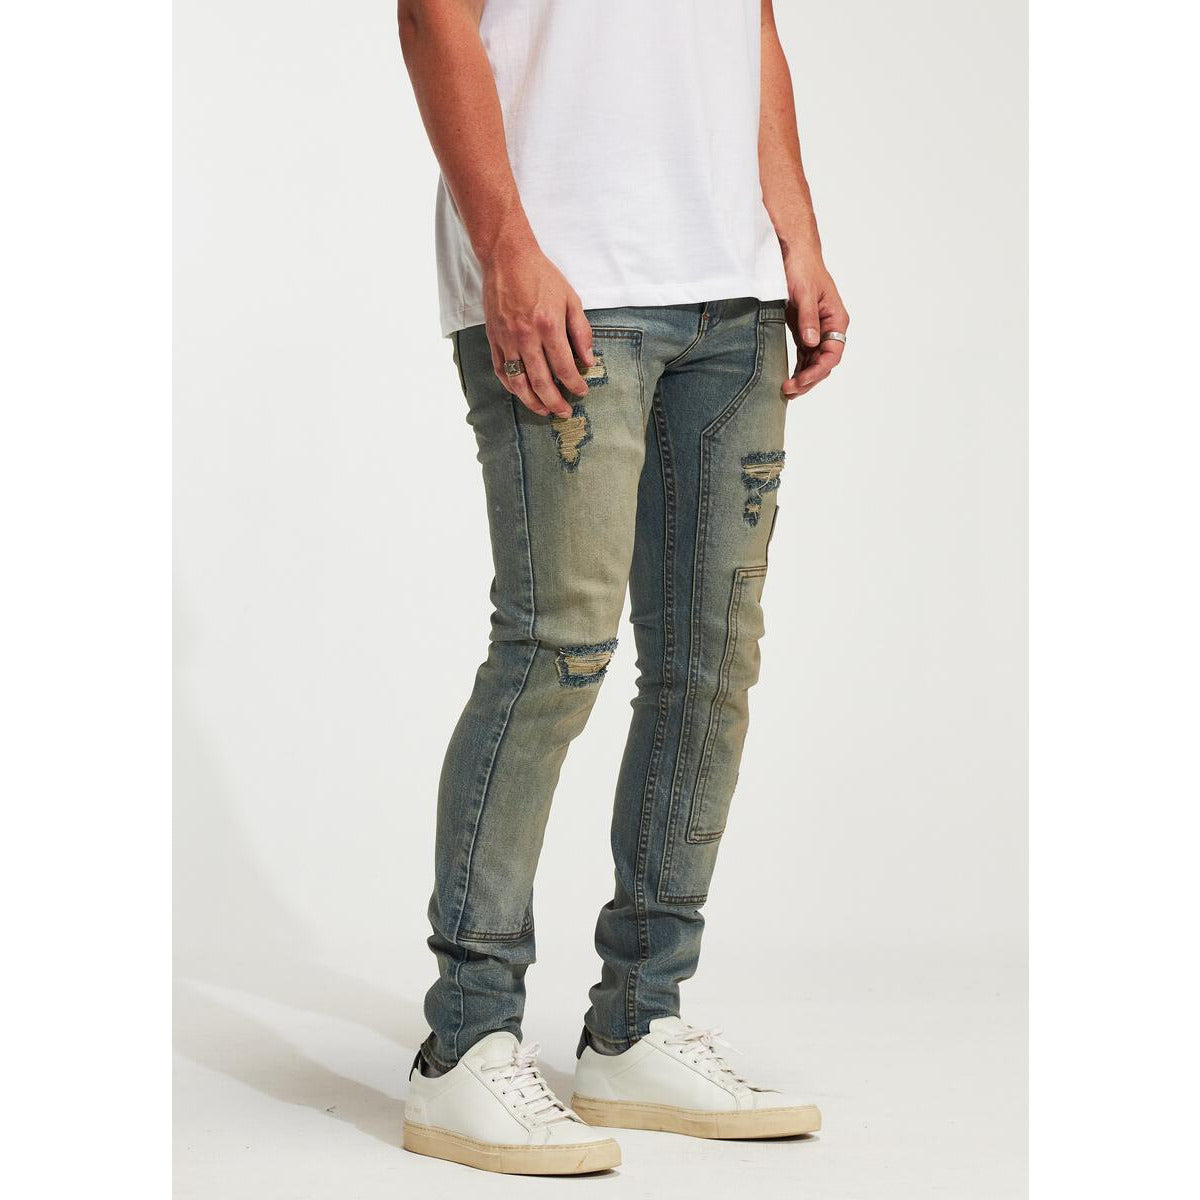 Embellish Hart 2.0 Ripped Sand Blue Jeans (EMBSP123-2)